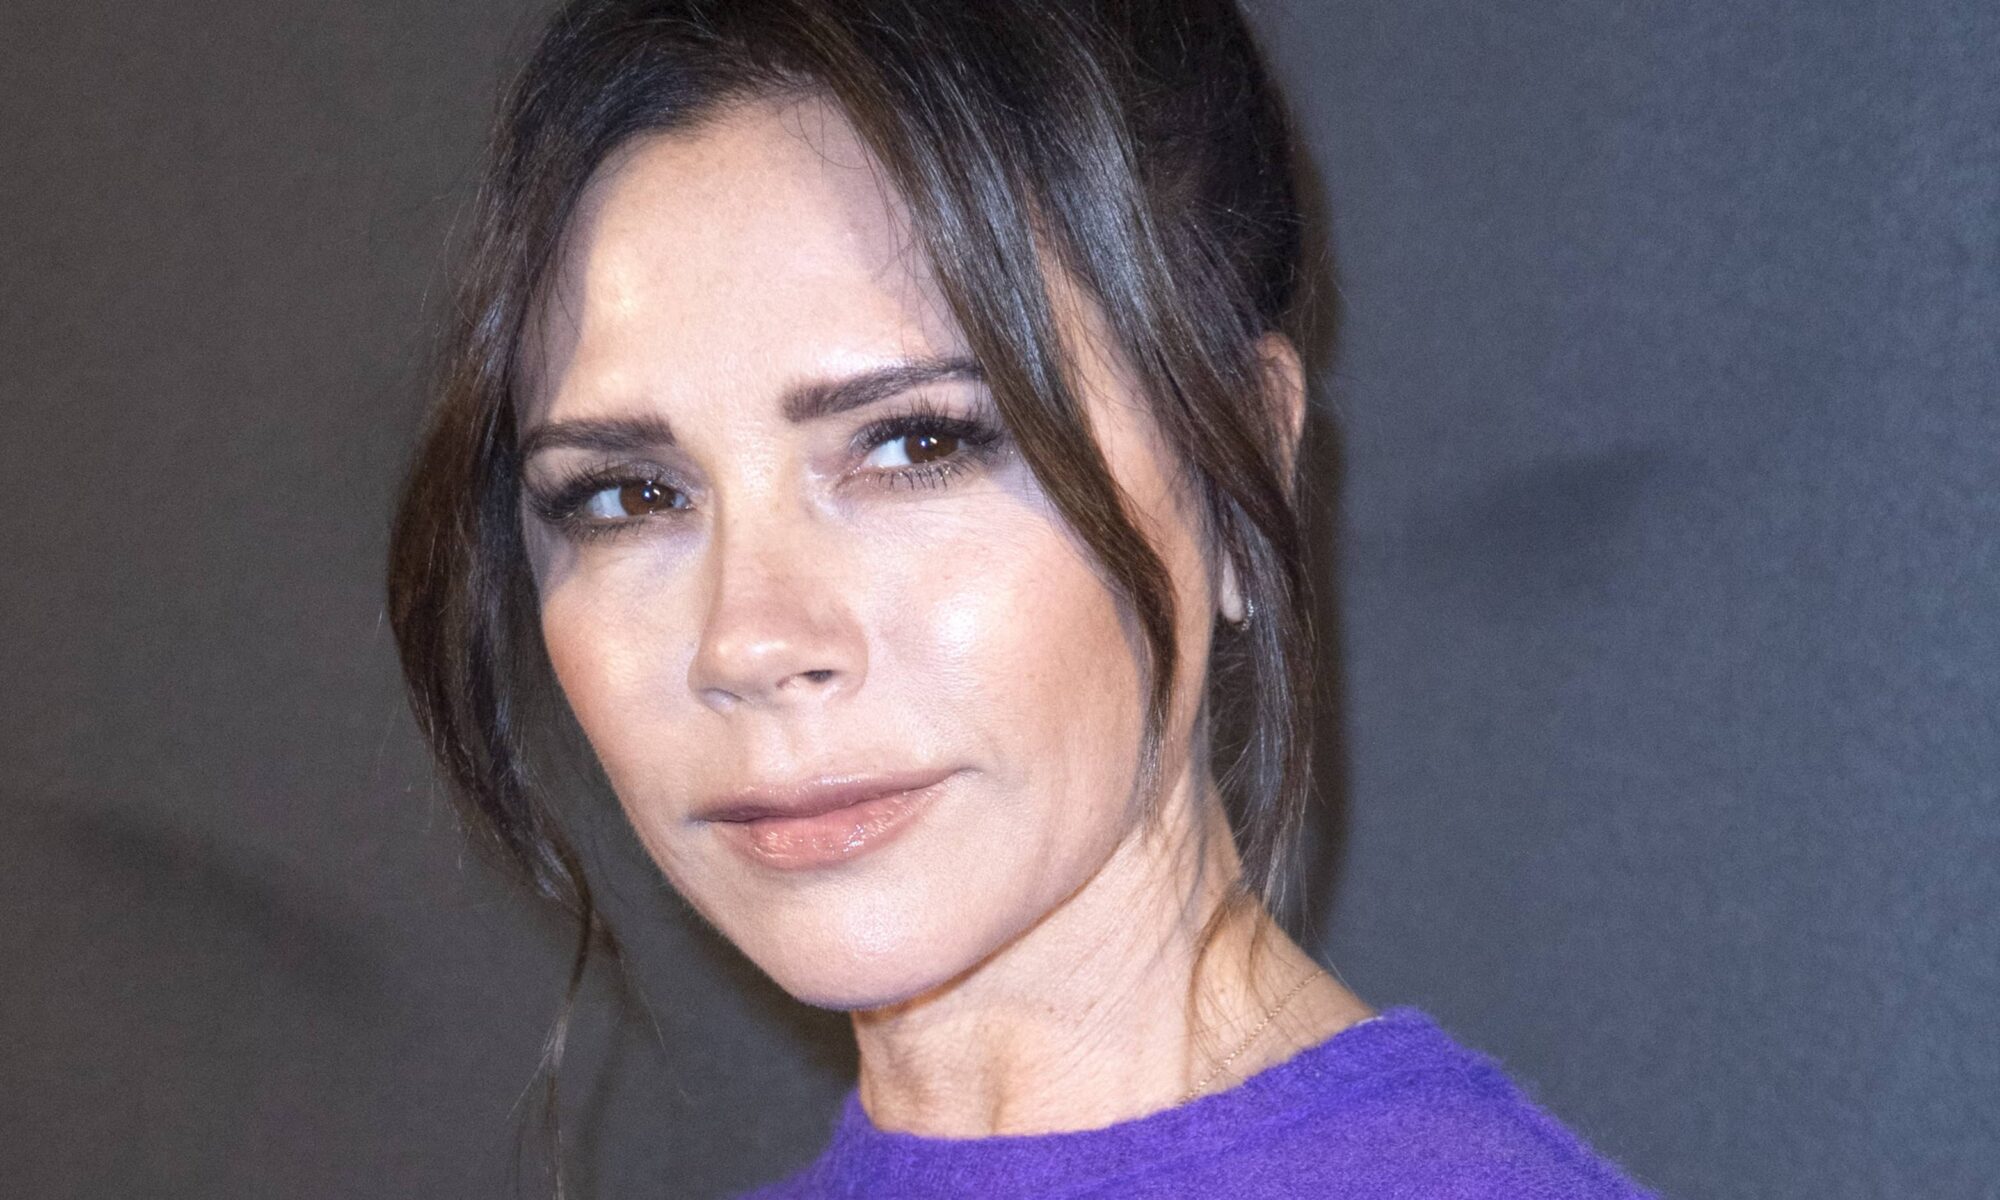 Victoria Beckham’s beauty and wellness routine has some seriously useful tips